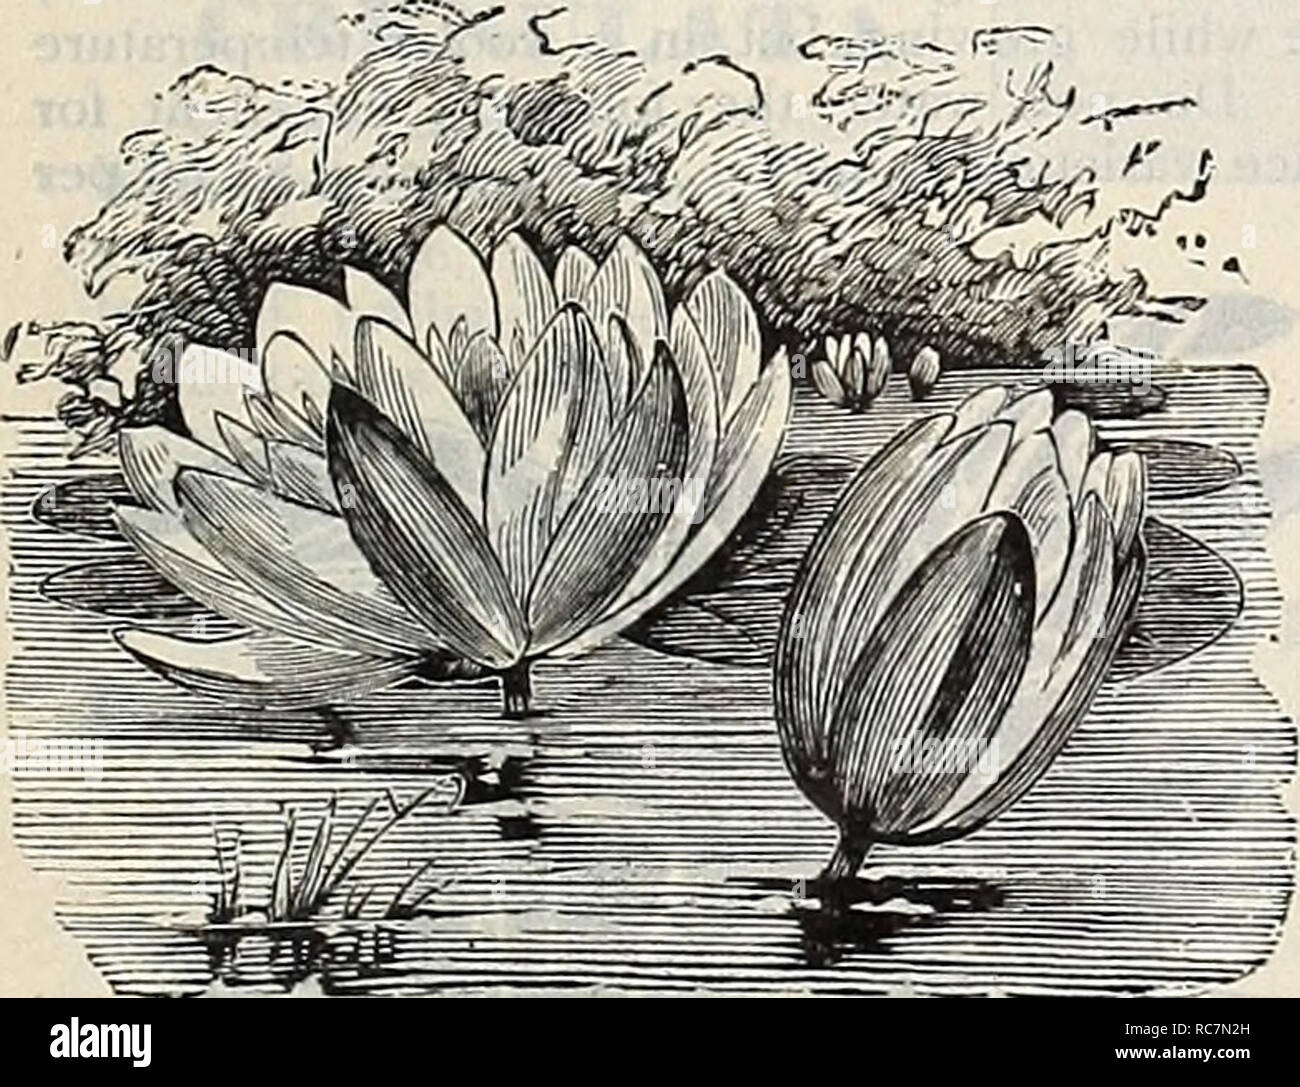 . Dreer's garden calendar : 1899. Seeds Catalogs; Nursery stock Catalogs; Gardening Equipment and supplies Catalogs; Flowers Seeds Catalogs; Vegetables Seeds Catalogs; Fruit Seeds Catalogs. Stratiotes Aloides (Water Aloe). SEEDS OF WATER LILIES. Raising seedling plants of all kinds has a peculiar charm and fascination, and a few remarks on the growing of Water Lilies from seed may be of service. The soil should be precisely the same as is used for the vast majority of flower seeds; that is, any good garden soil, nicely sifted, with a small addition of sand. The Tender Nymphaeas and Victorias s Stock Photo